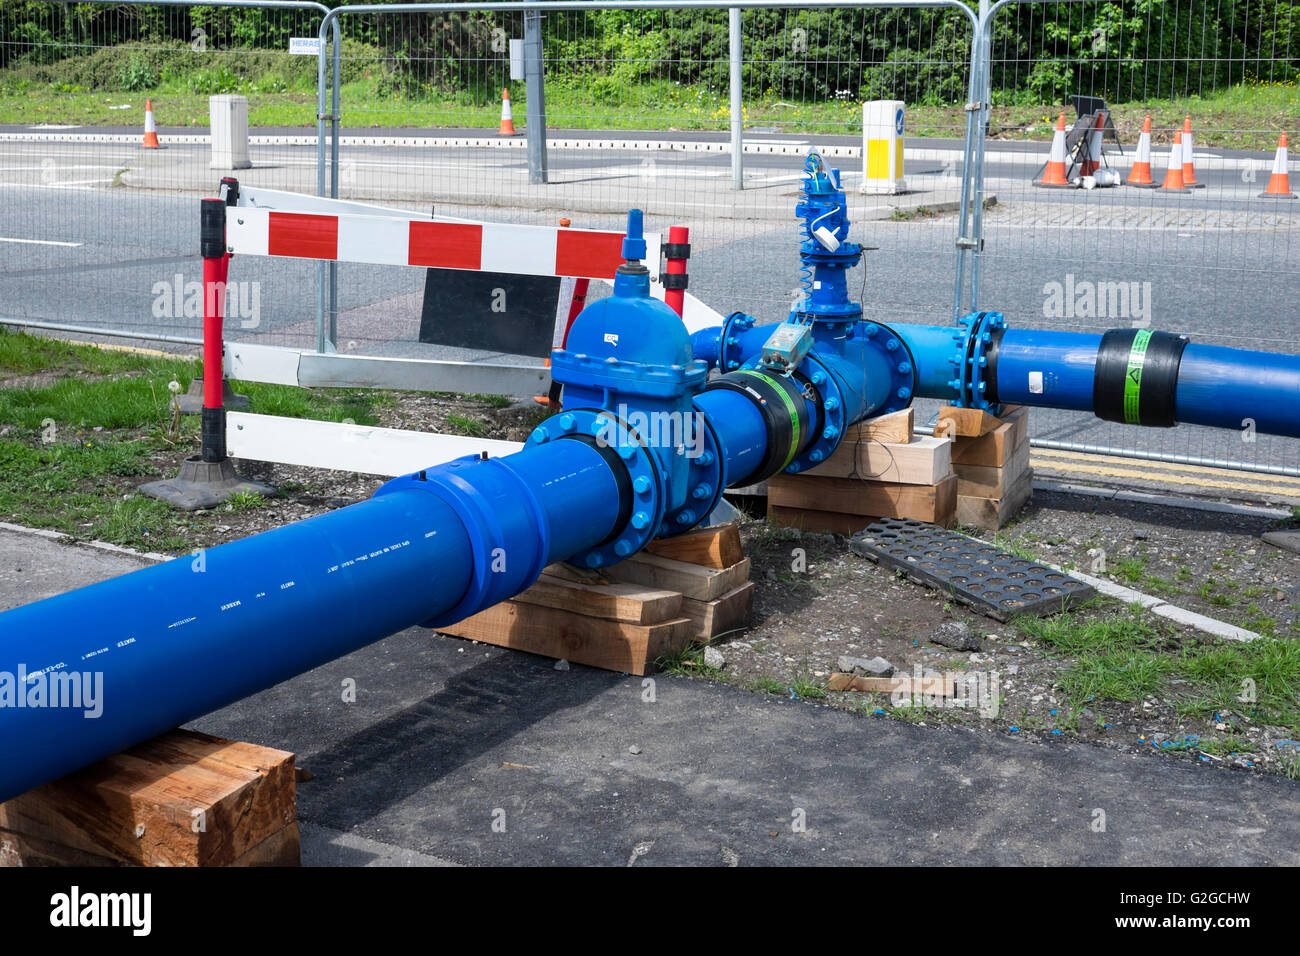 A blue temporary water main pipe Stock Photo